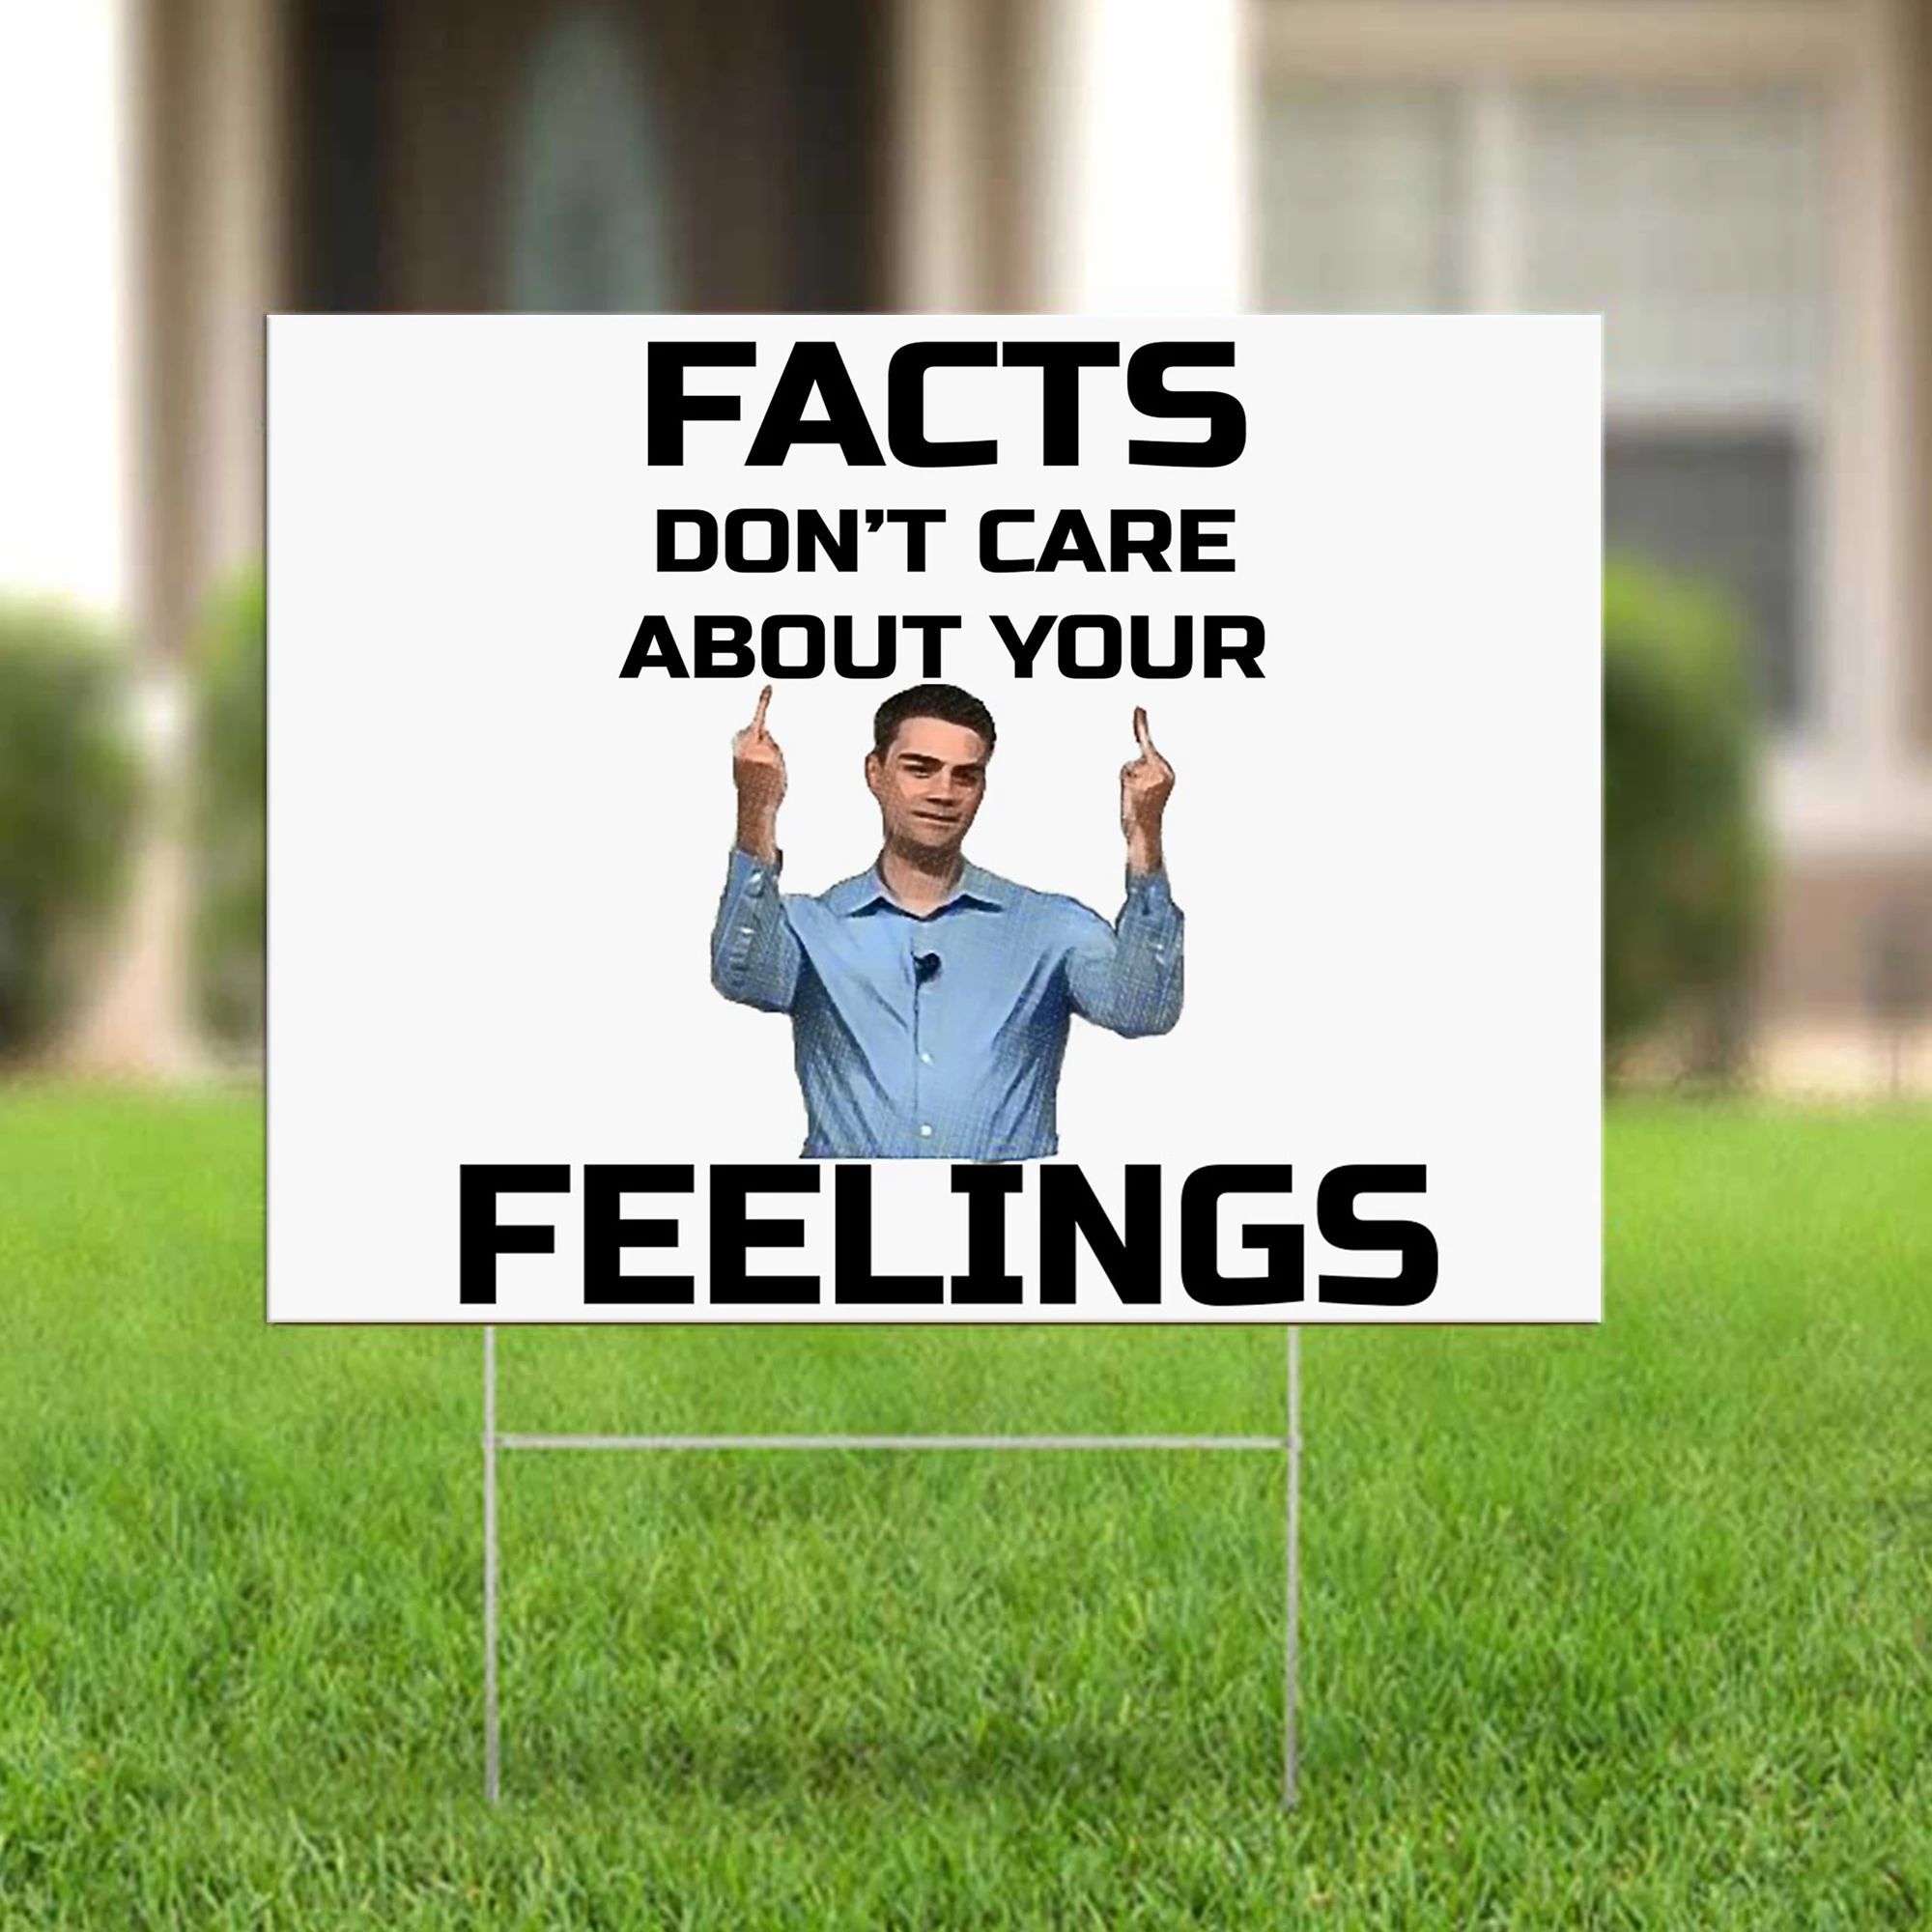 Ben Shapiro Lawn Sign Facts Don't Care About Your Feelings Funny Yard Sign For Election Days